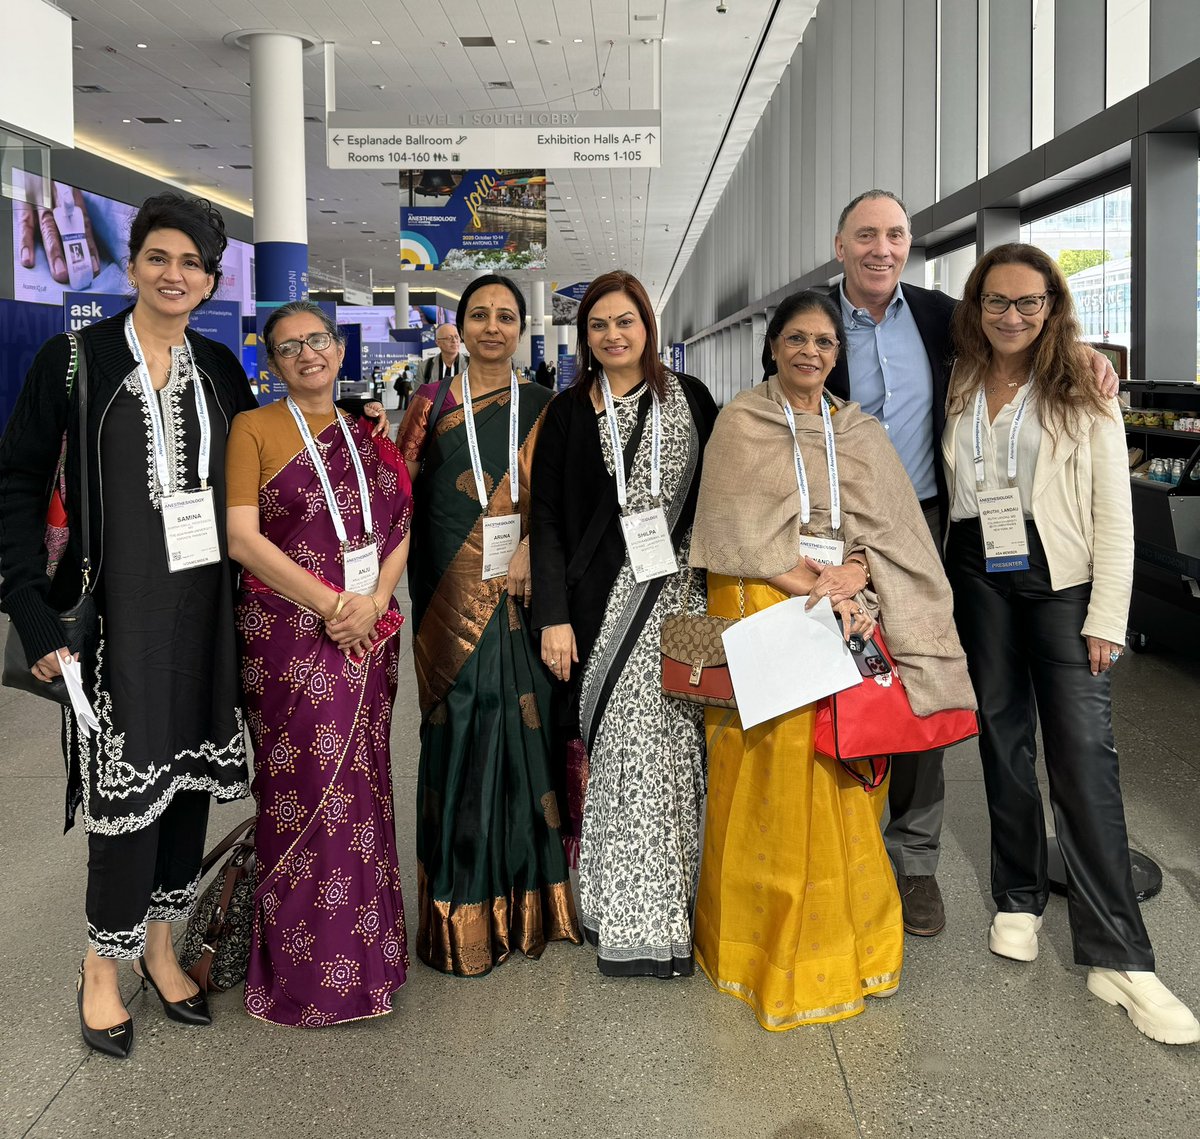 #ANES23 Humbled & delighted to meet #ObAnes friends - here with @gropperUCSF Dr. Sunanda Gupta presenting on ‘the challenges in reducing SMM & MMR in low and middle income countries’ Dr. Samina Ismail on ‘Unique challenges & solutions for decreasing SMM & MMR in Pakistan’